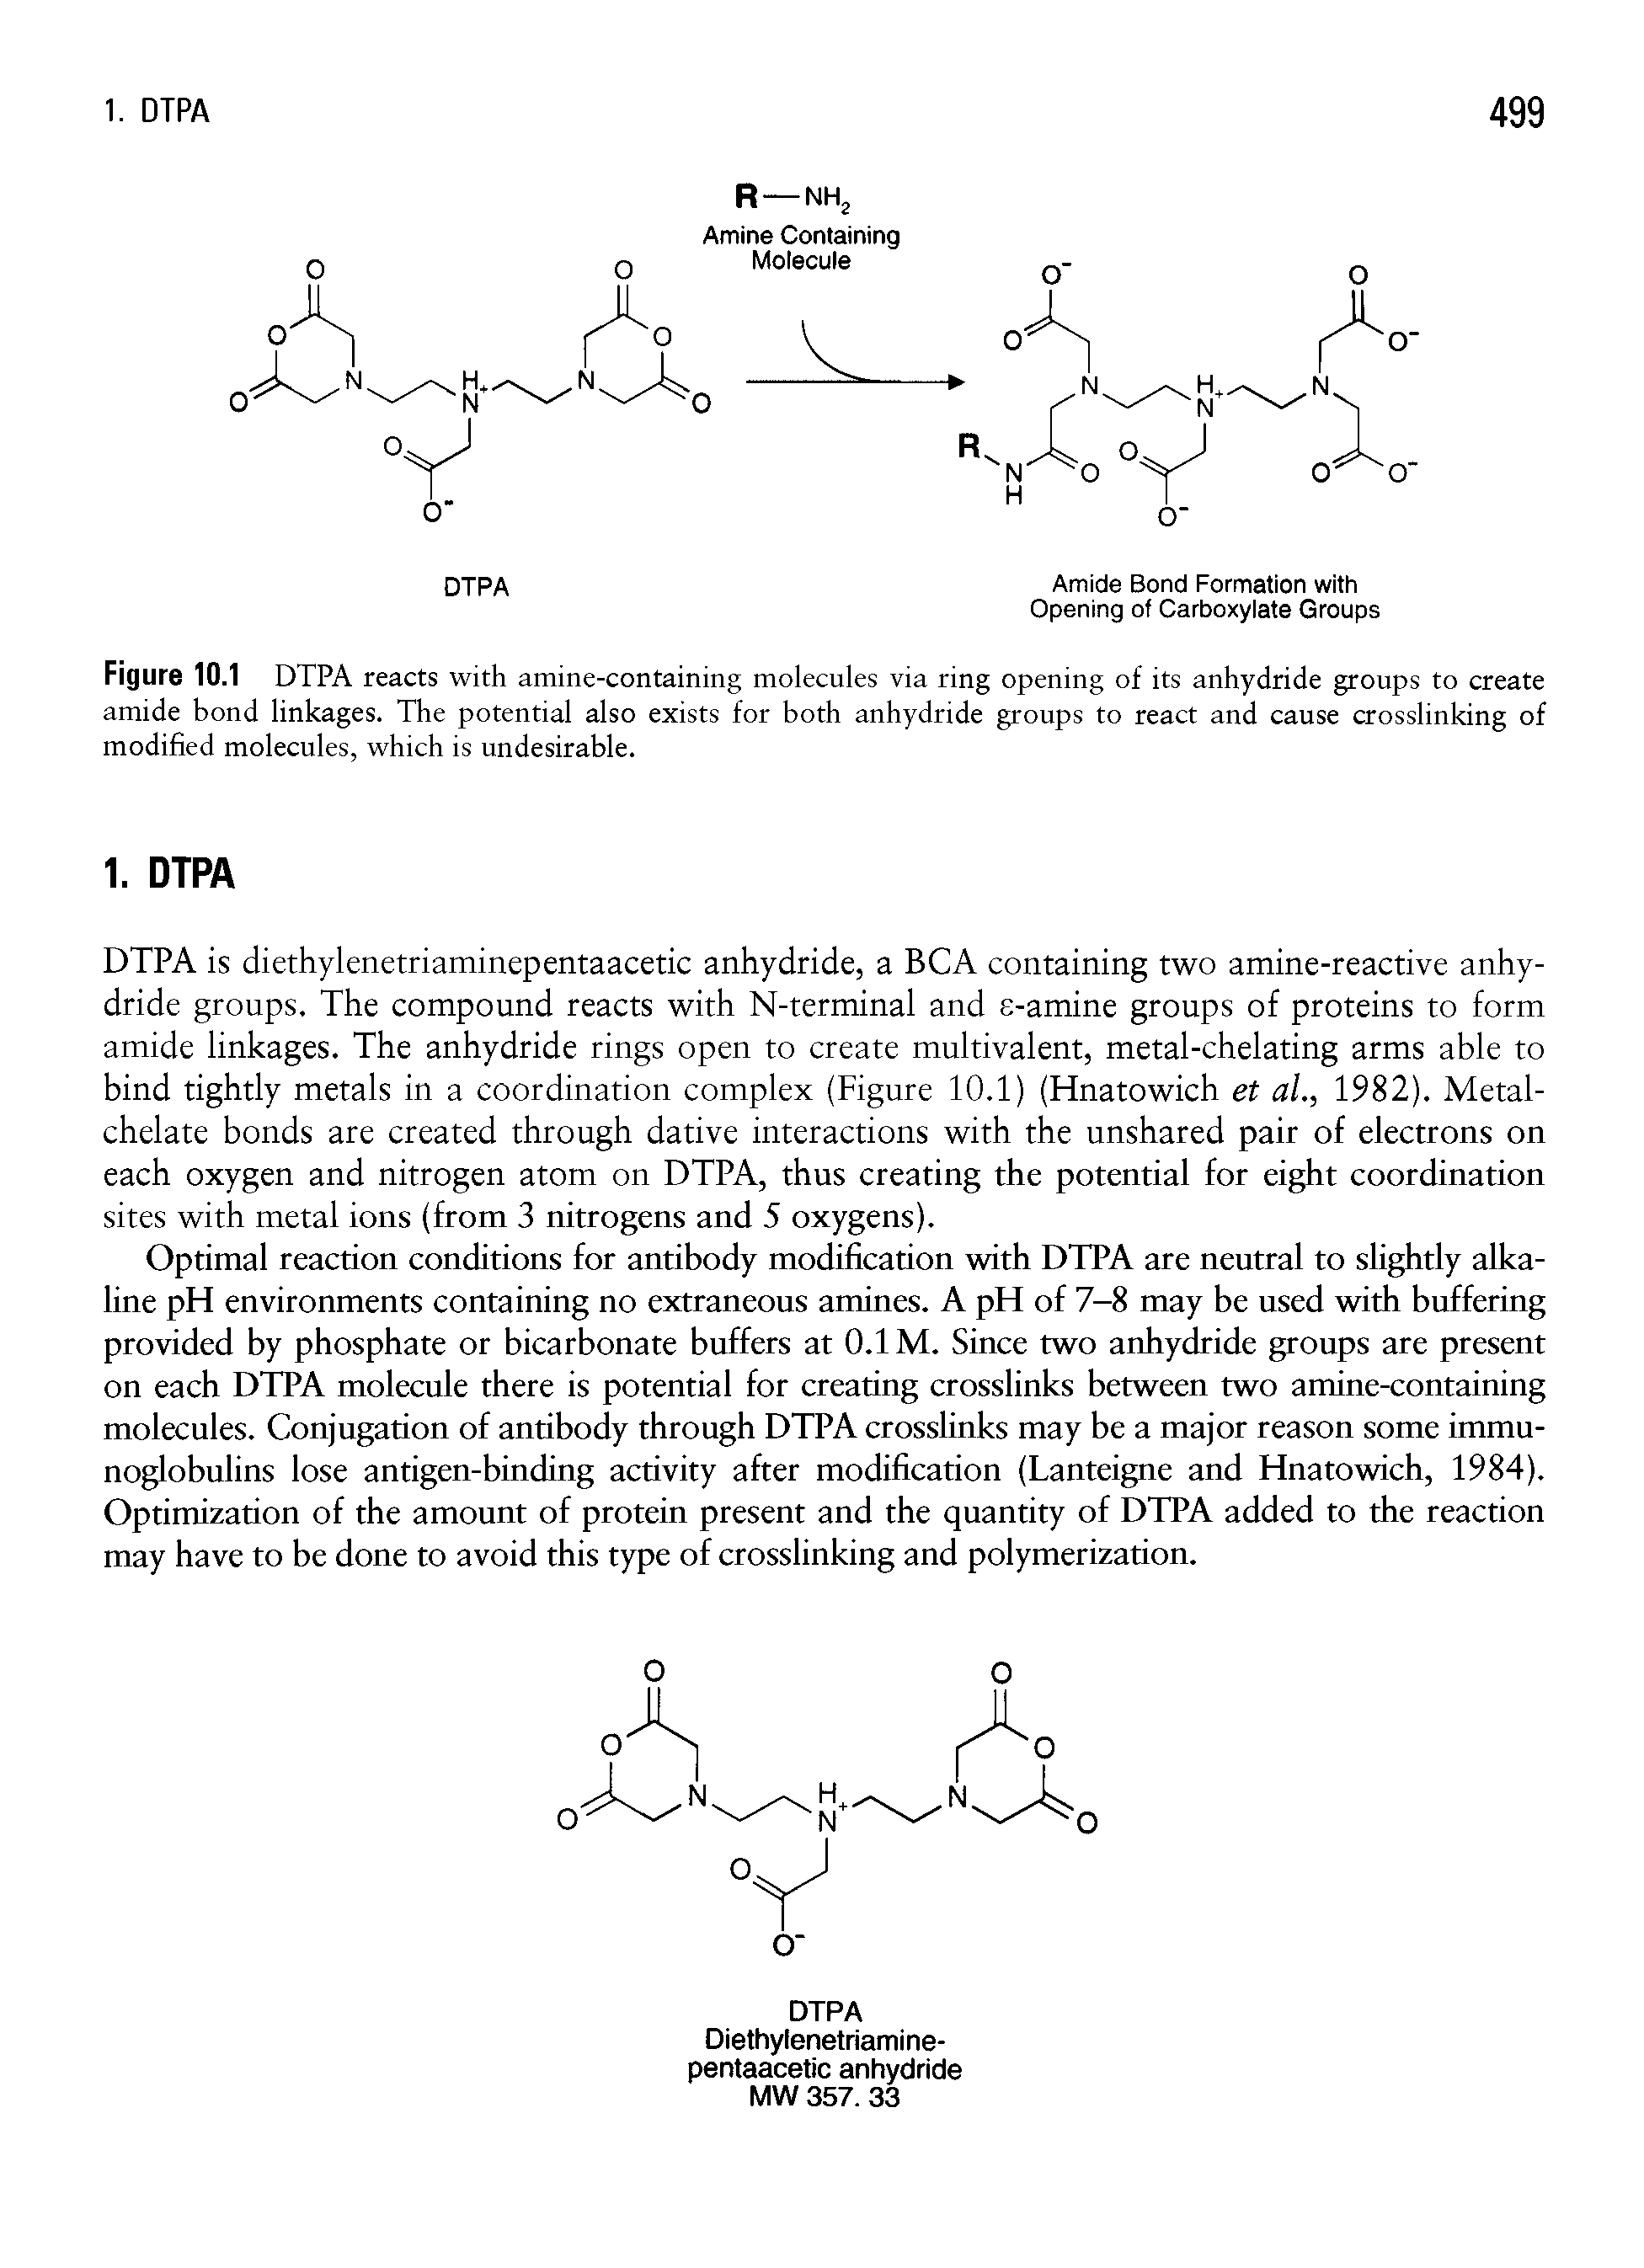 Figure 10.1 DTPA reacts with amine-containing molecules via ring opening of its anhydride groups to create amide bond linkages. The potential also exists for both anhydride groups to react and cause crosslinking of modified molecules, which is undesirable.